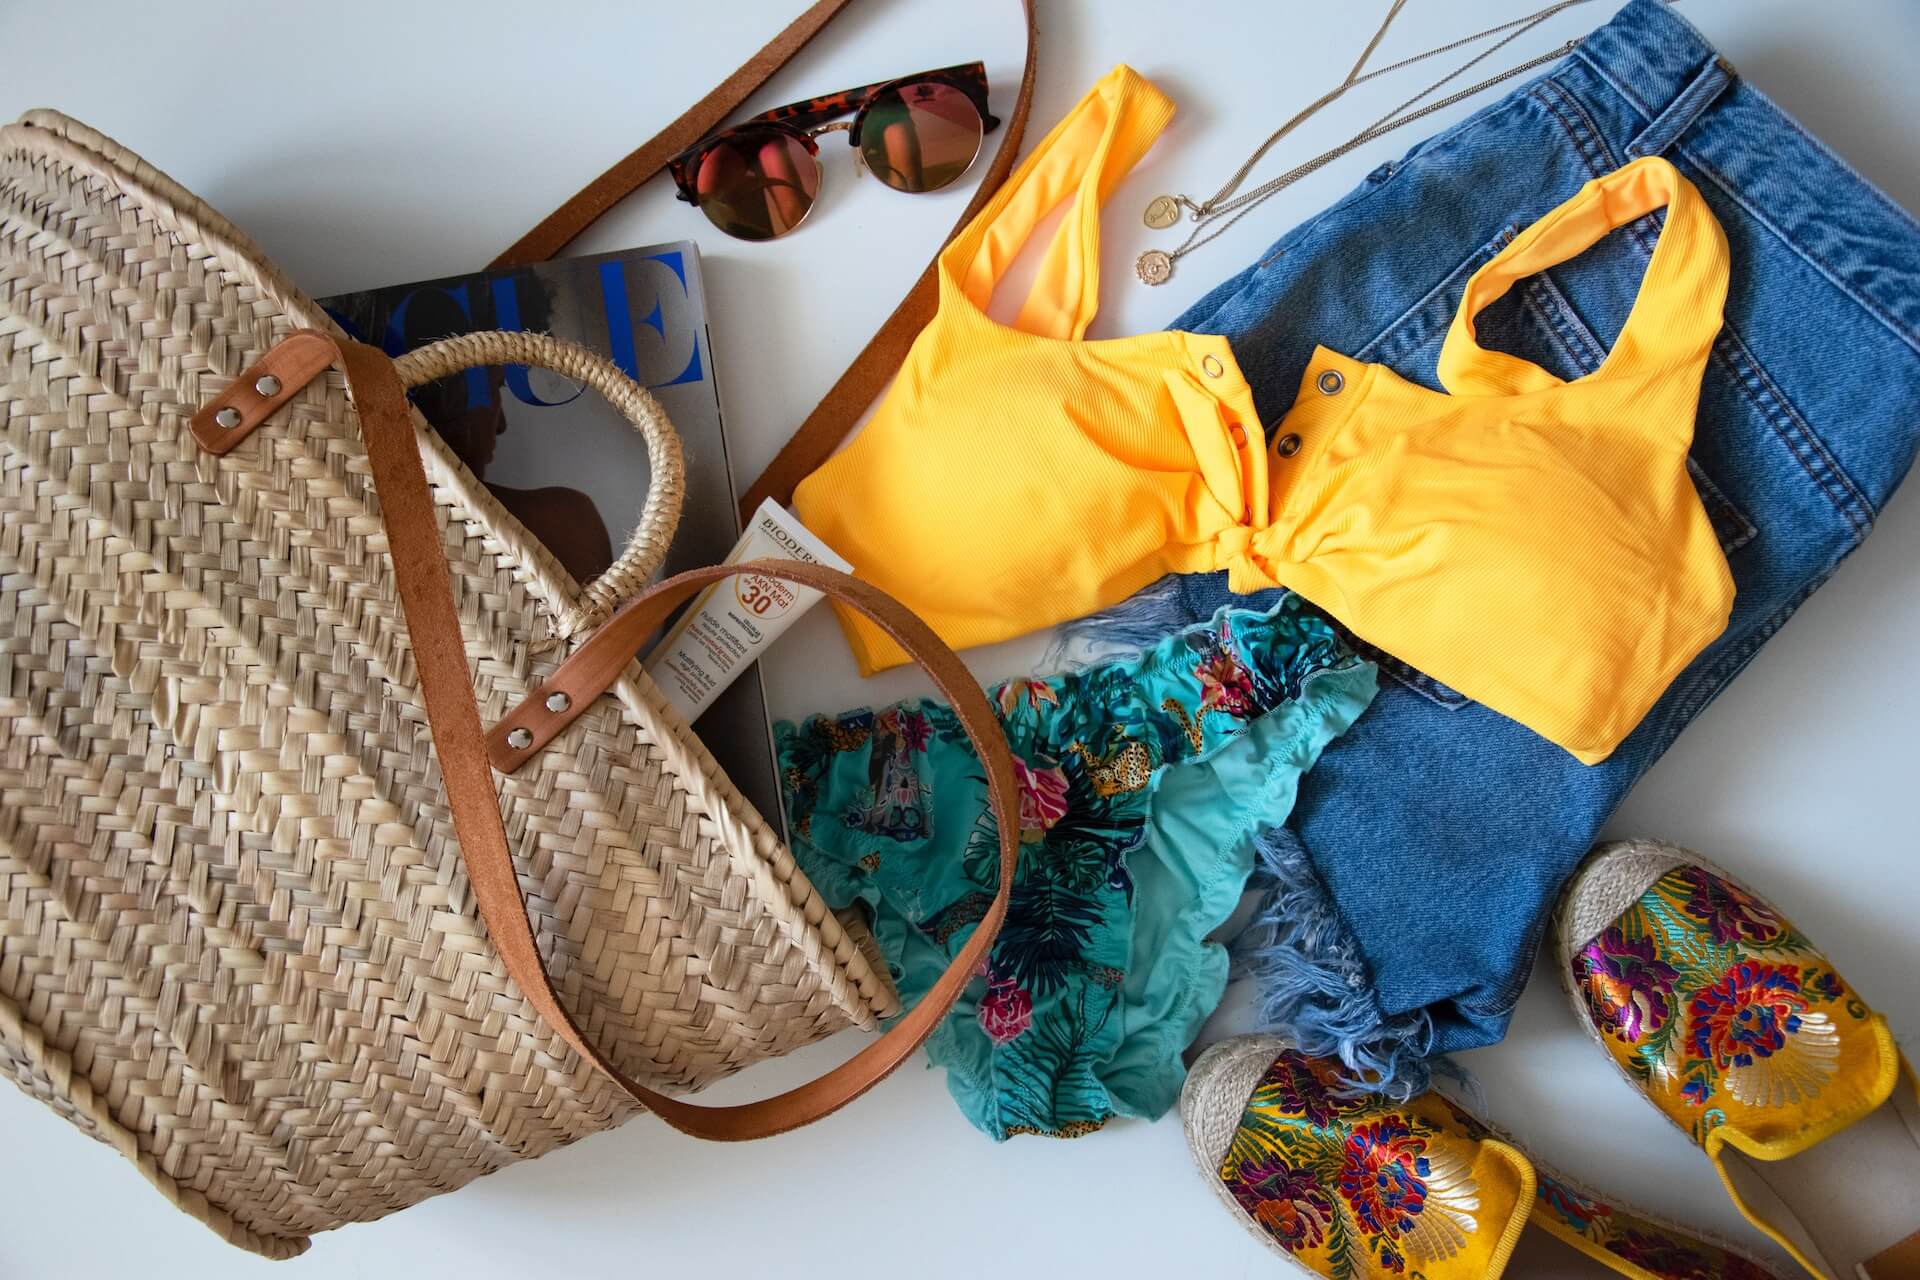 11 Sustainable Summer Essentials You Need for an Ethical and